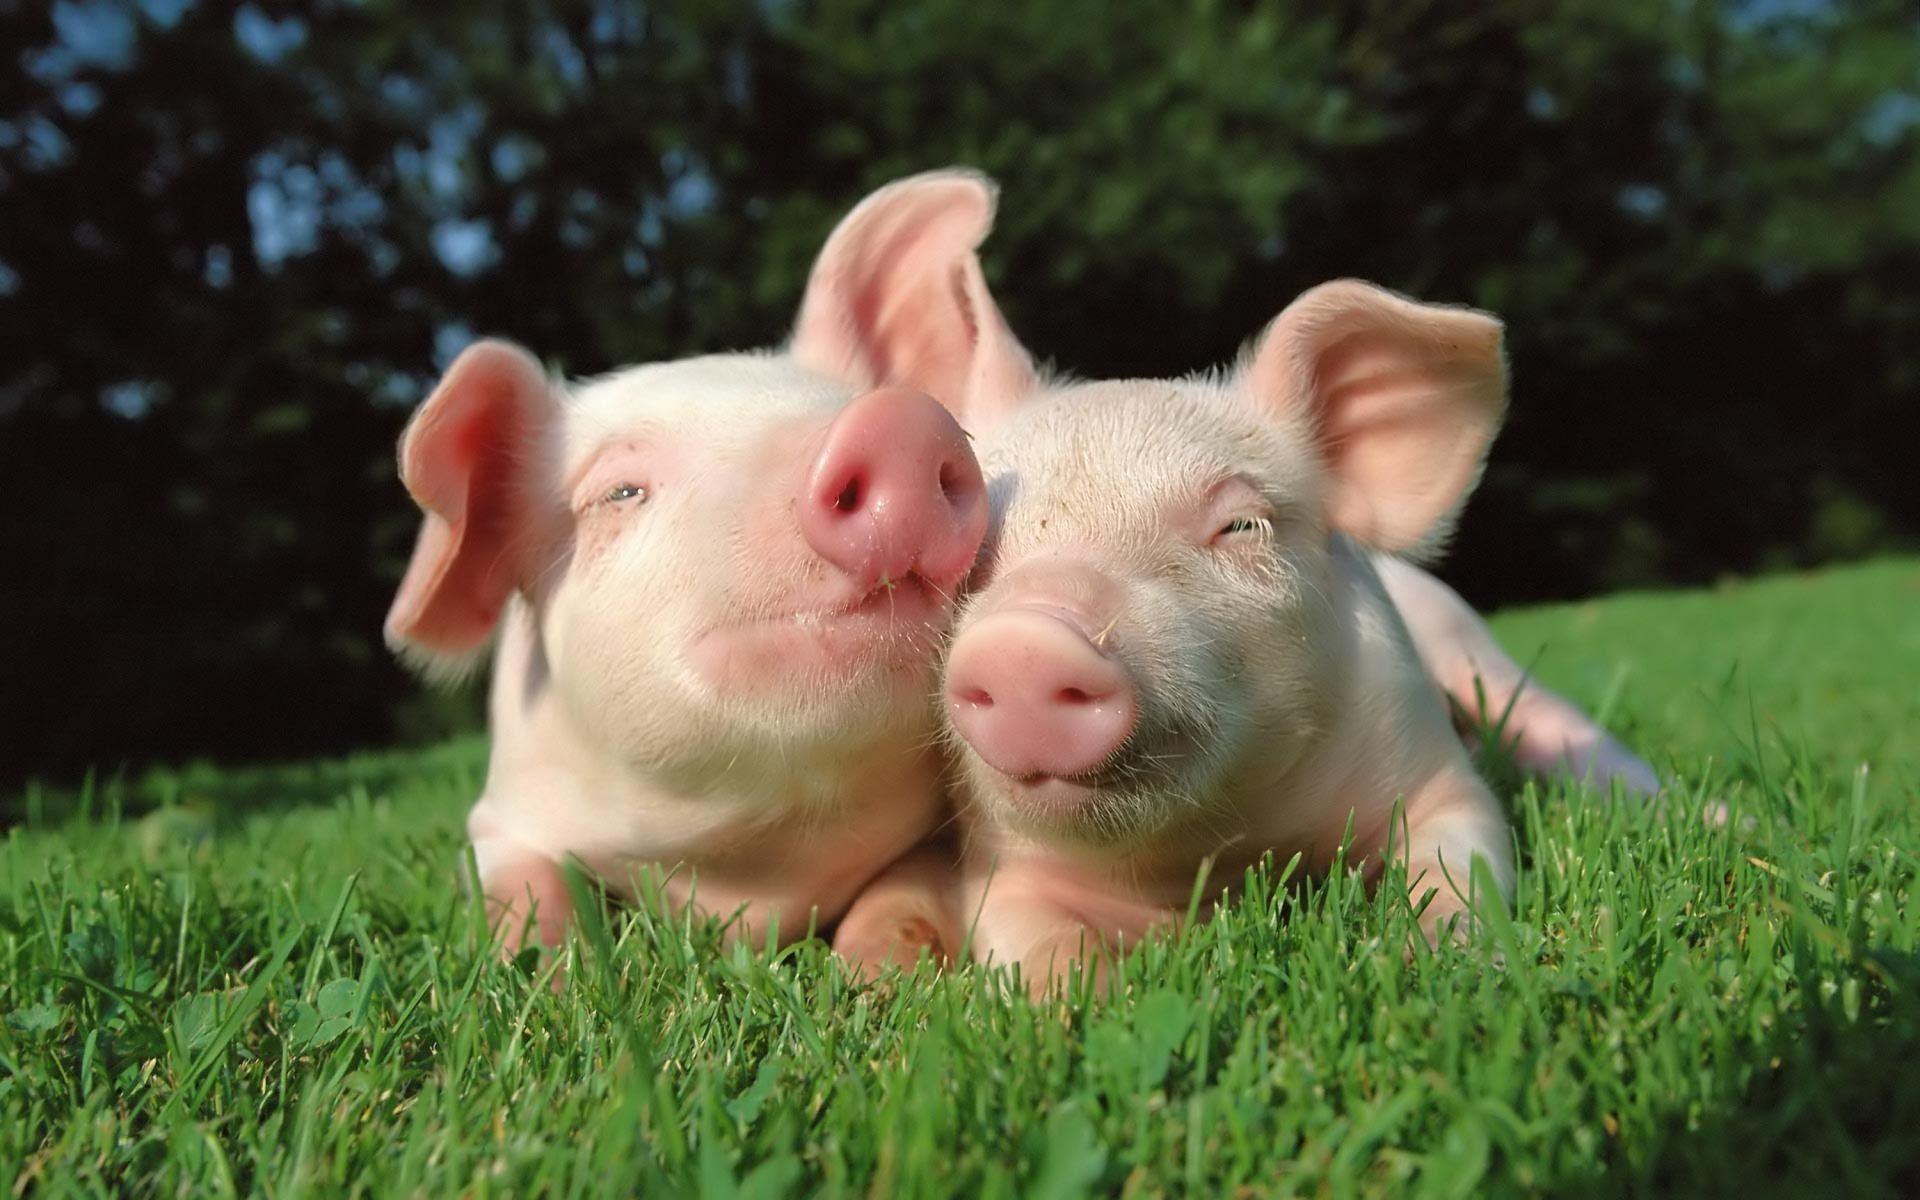 couple of pigs watching. animal. Animals, Cute animals, Cute pigs